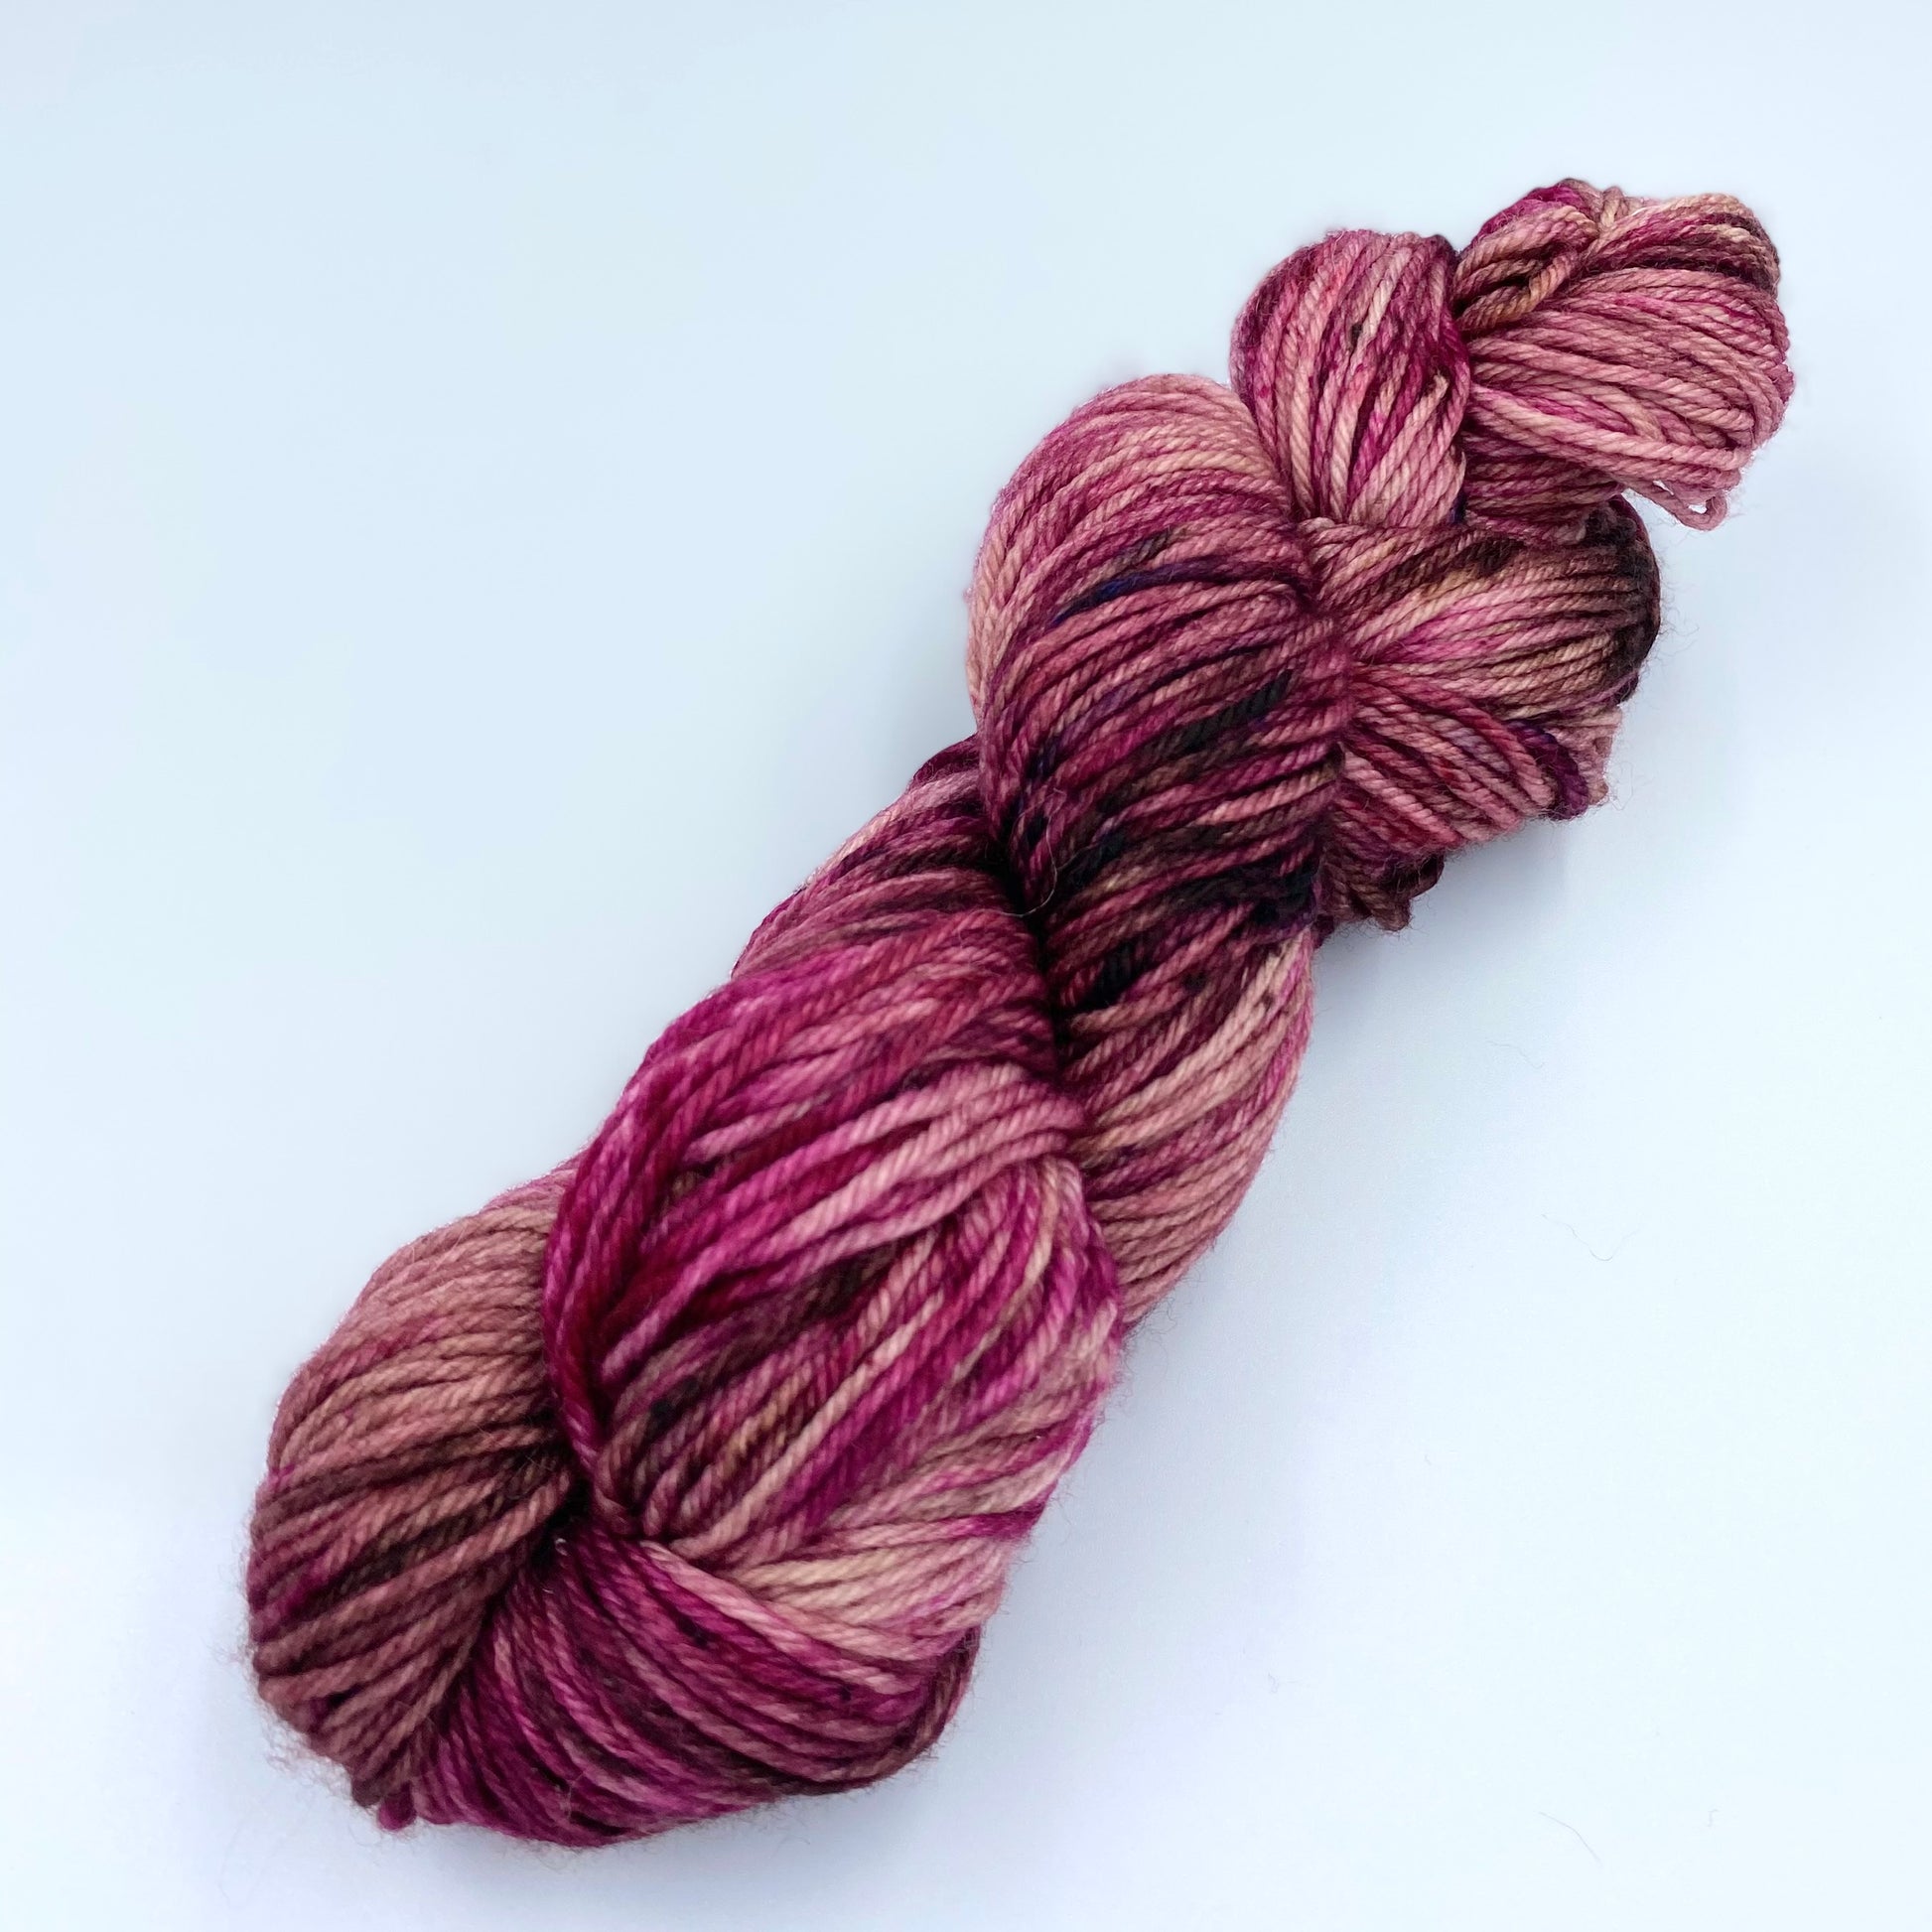 Skein of superwash merino yarn hand dyed in a mix of fuschia, brown, rose and baby pink color